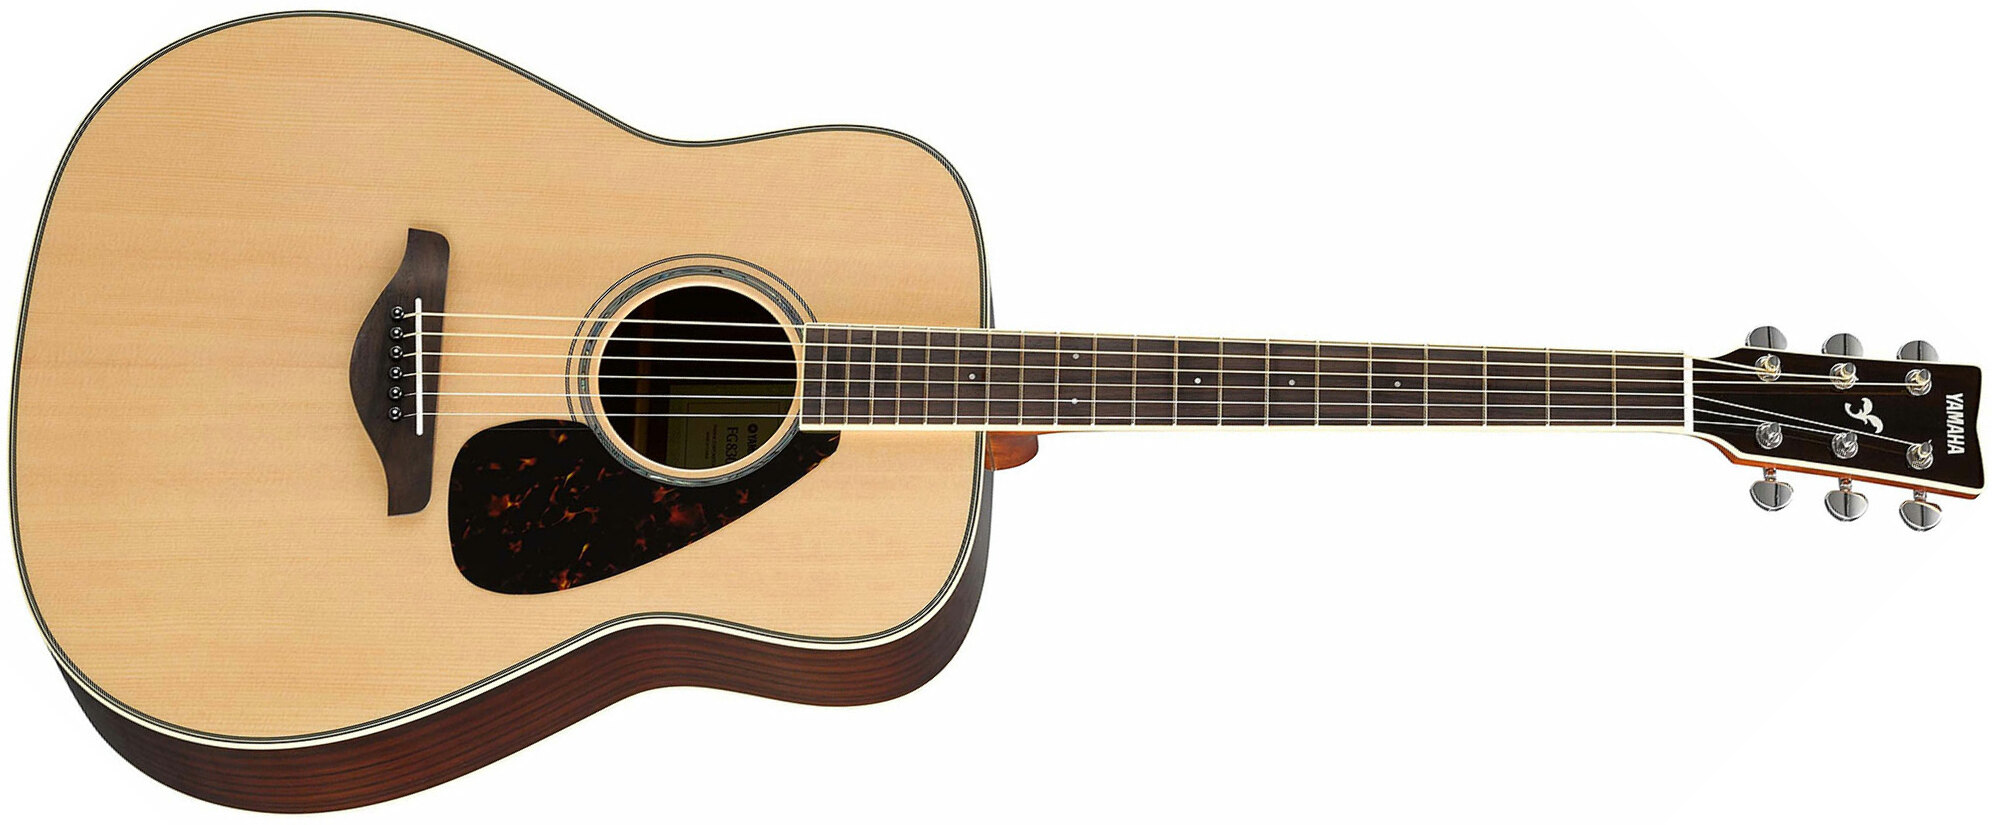 Yamaha Fg830 Nt Dreadnought Epicea Palissandre Rw 2016 - Natural Gloss - Westerngitaar & electro - Main picture